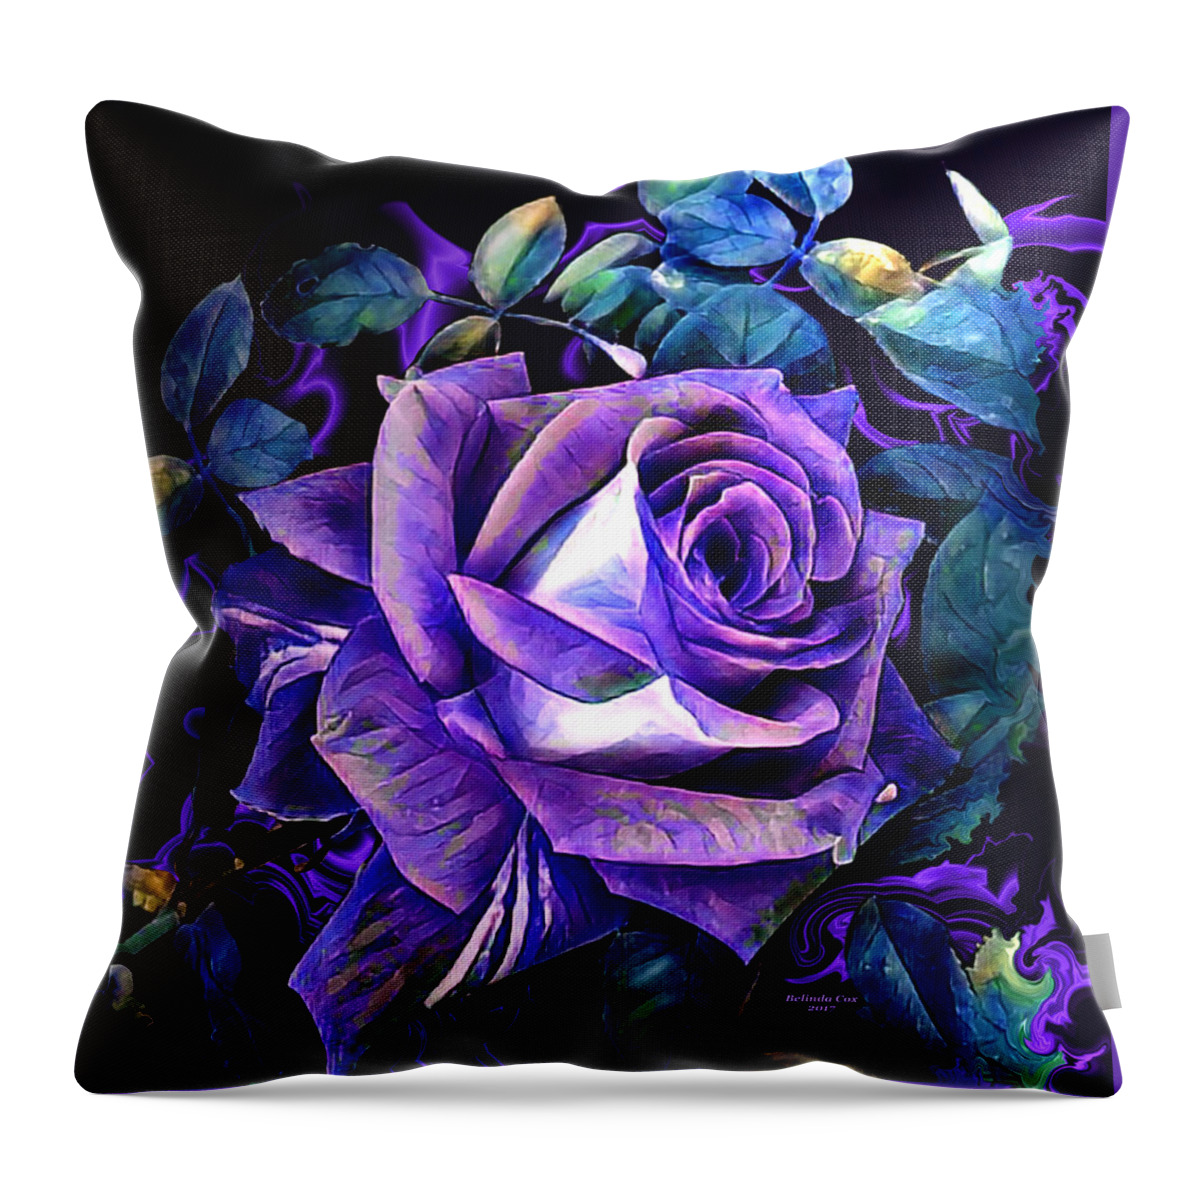 Digital Art Throw Pillow featuring the digital art Purple Rose Bud Painting by Artful Oasis